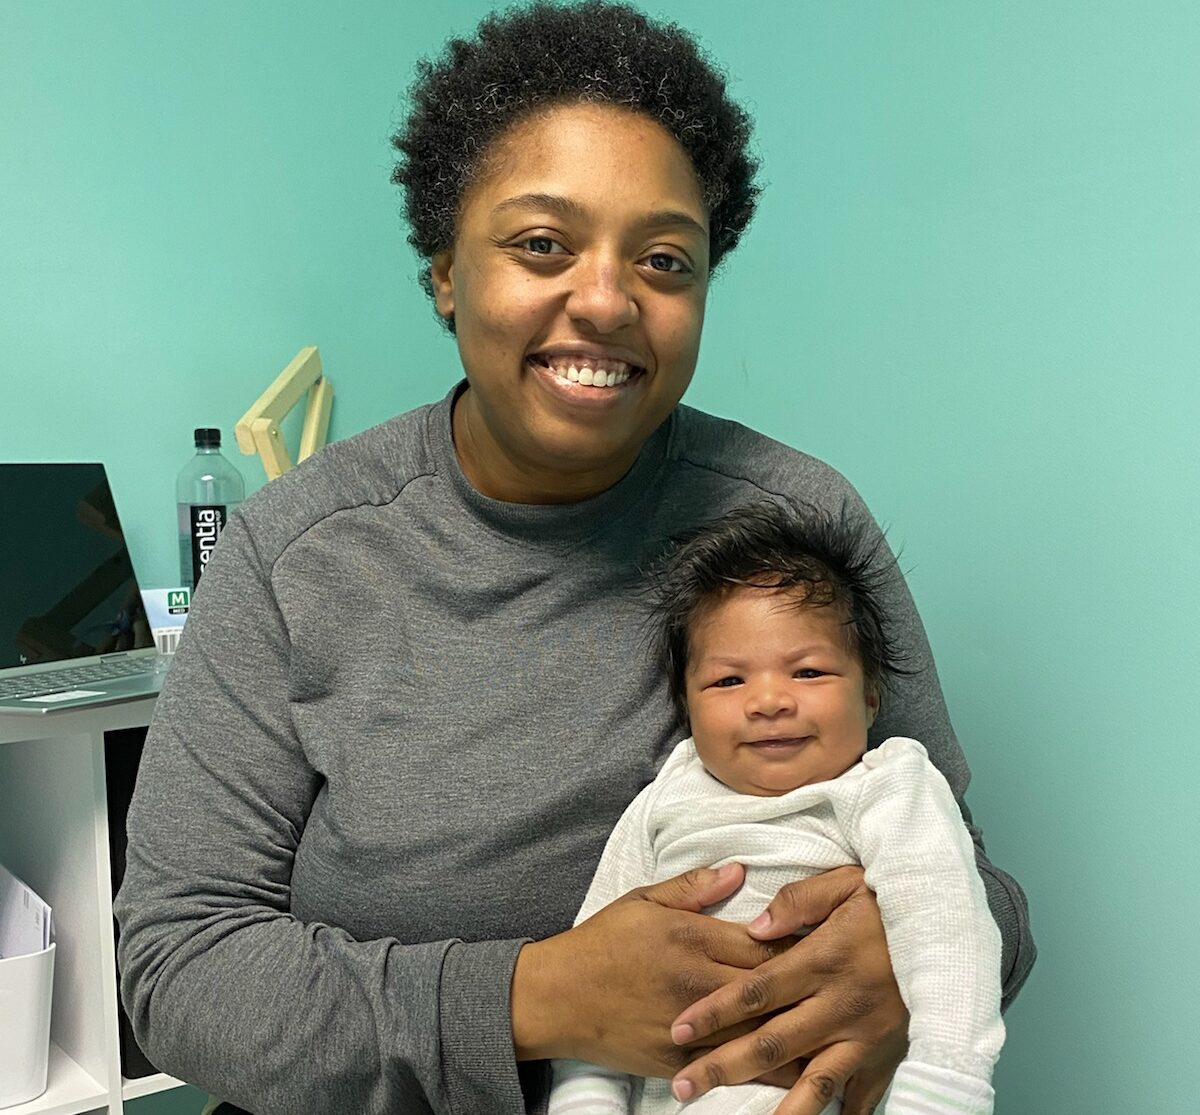 Mercedes sitting and holding a content infant in her exam room while smiling.